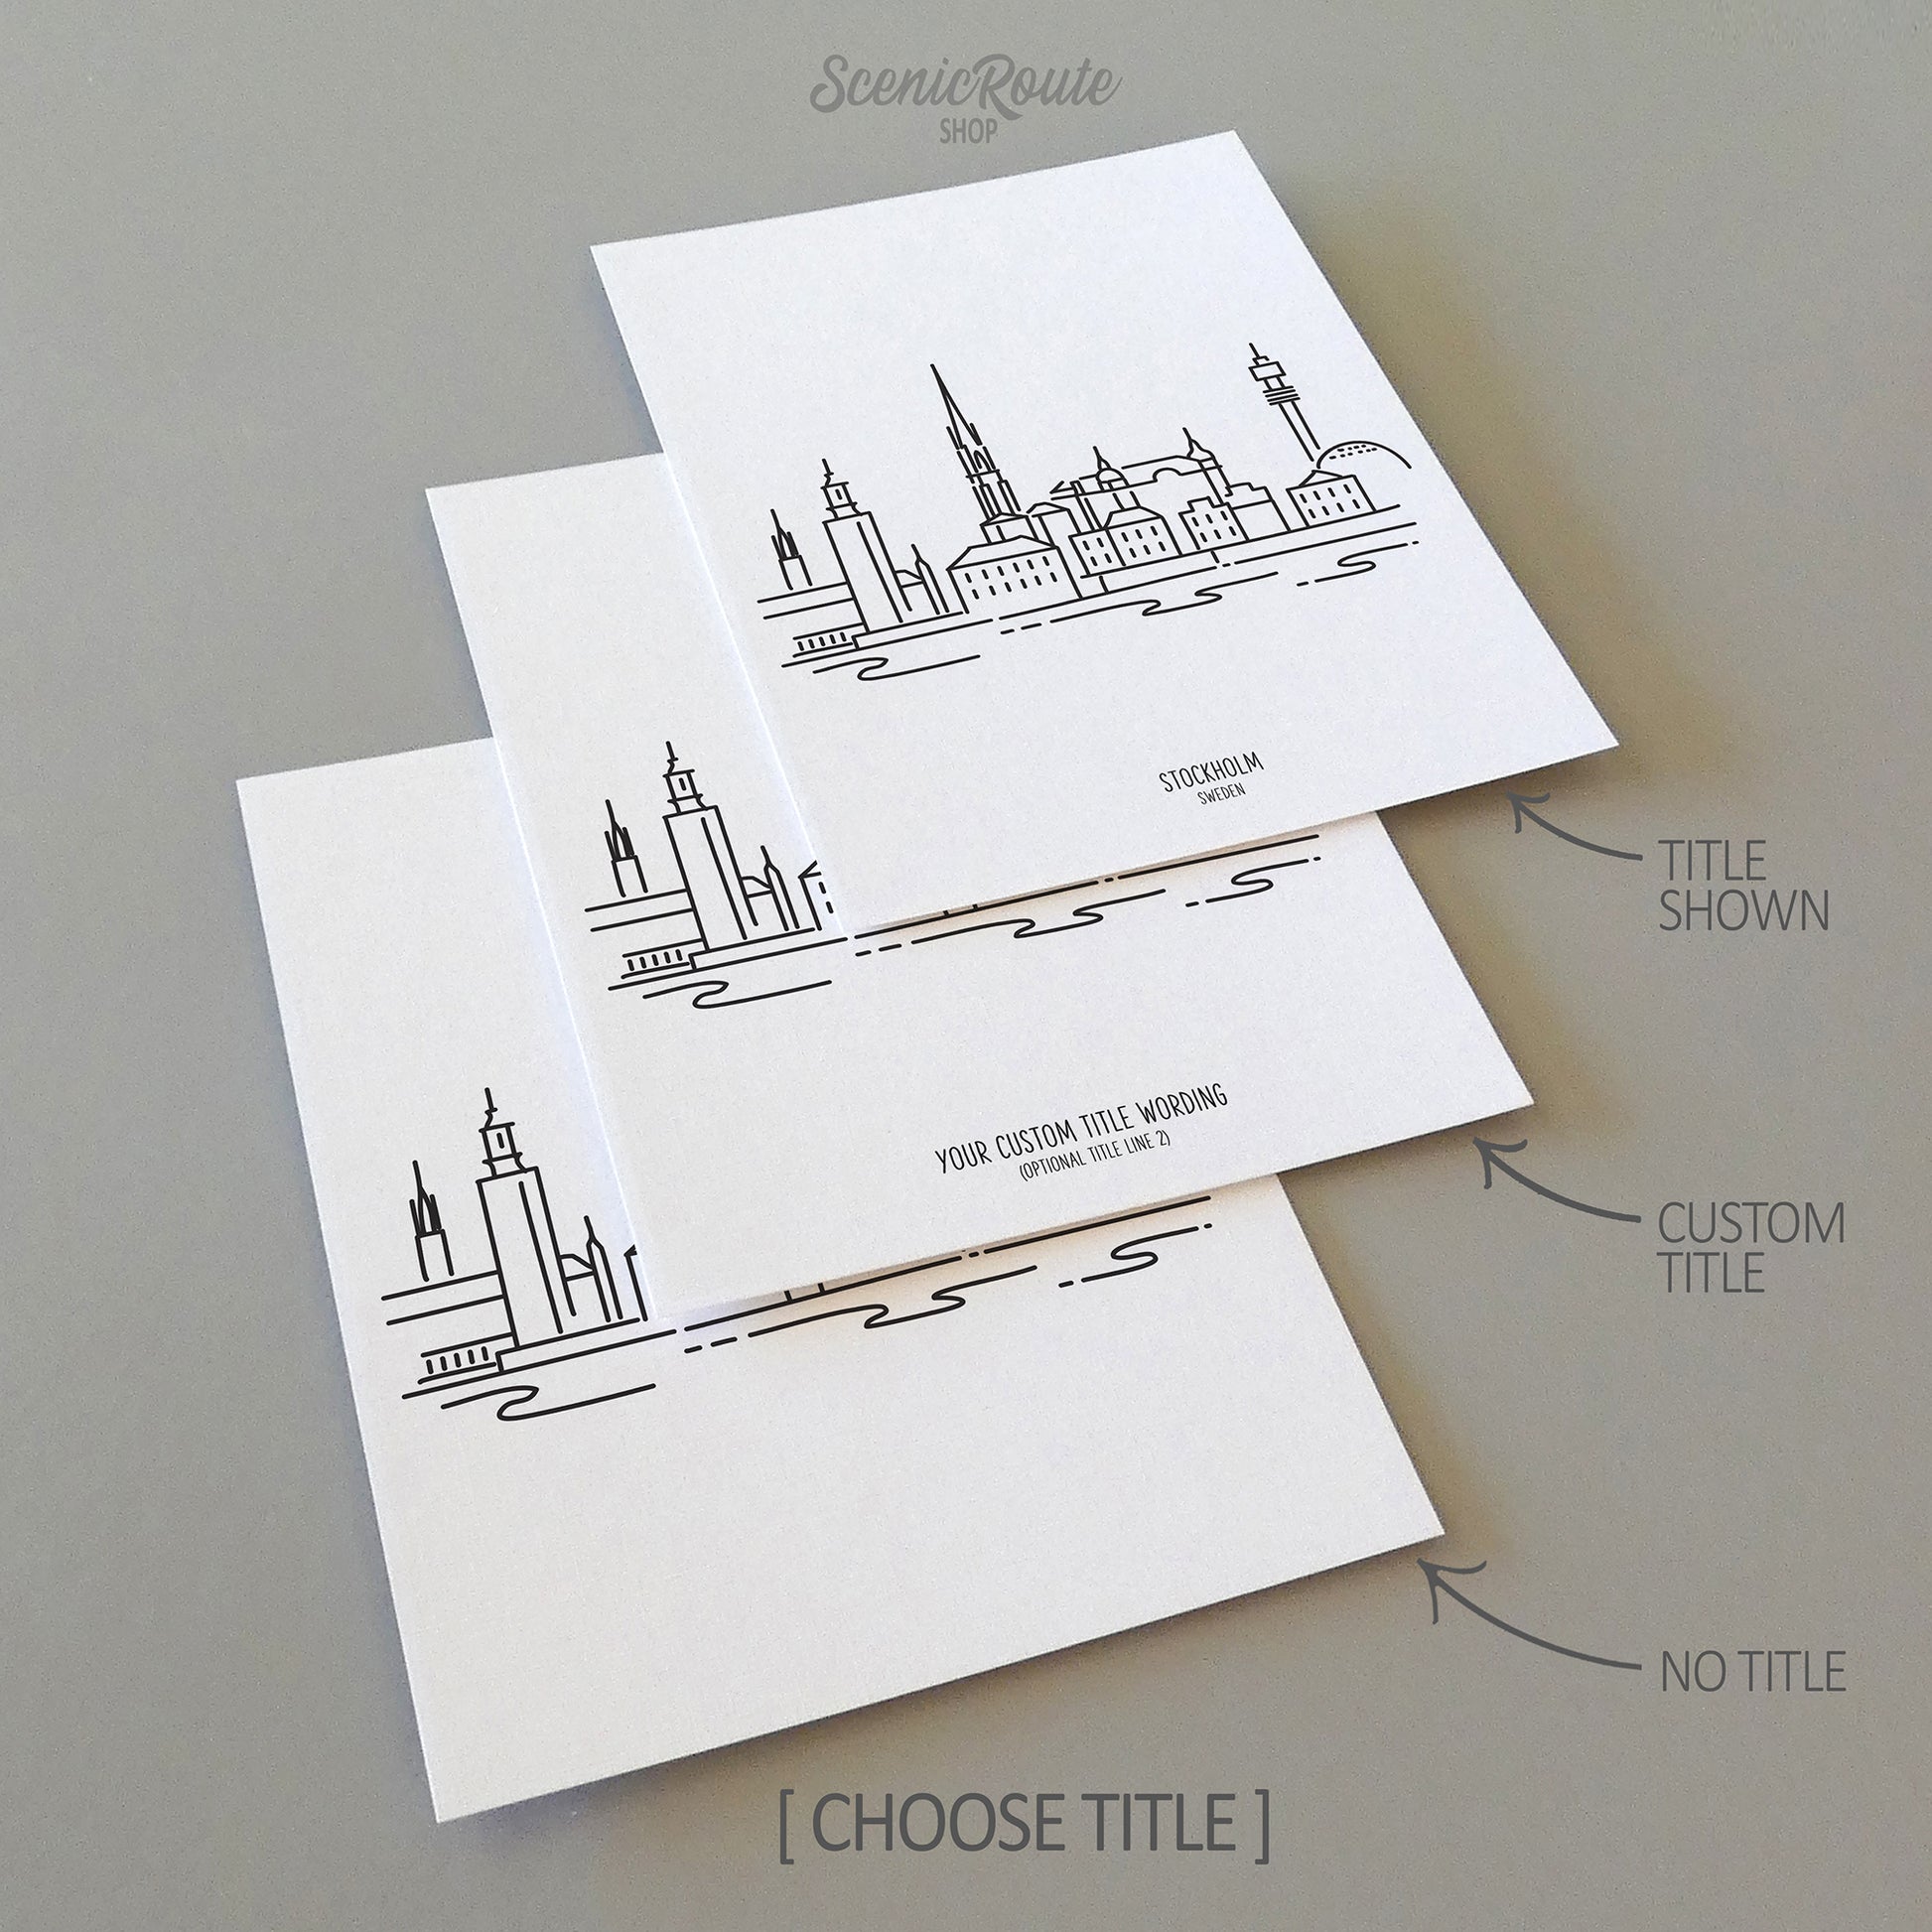 Three line art drawings of the Stockholm Sweden Skyline on white linen paper with a gray background. The pieces are shown with title options that can be chosen and personalized.